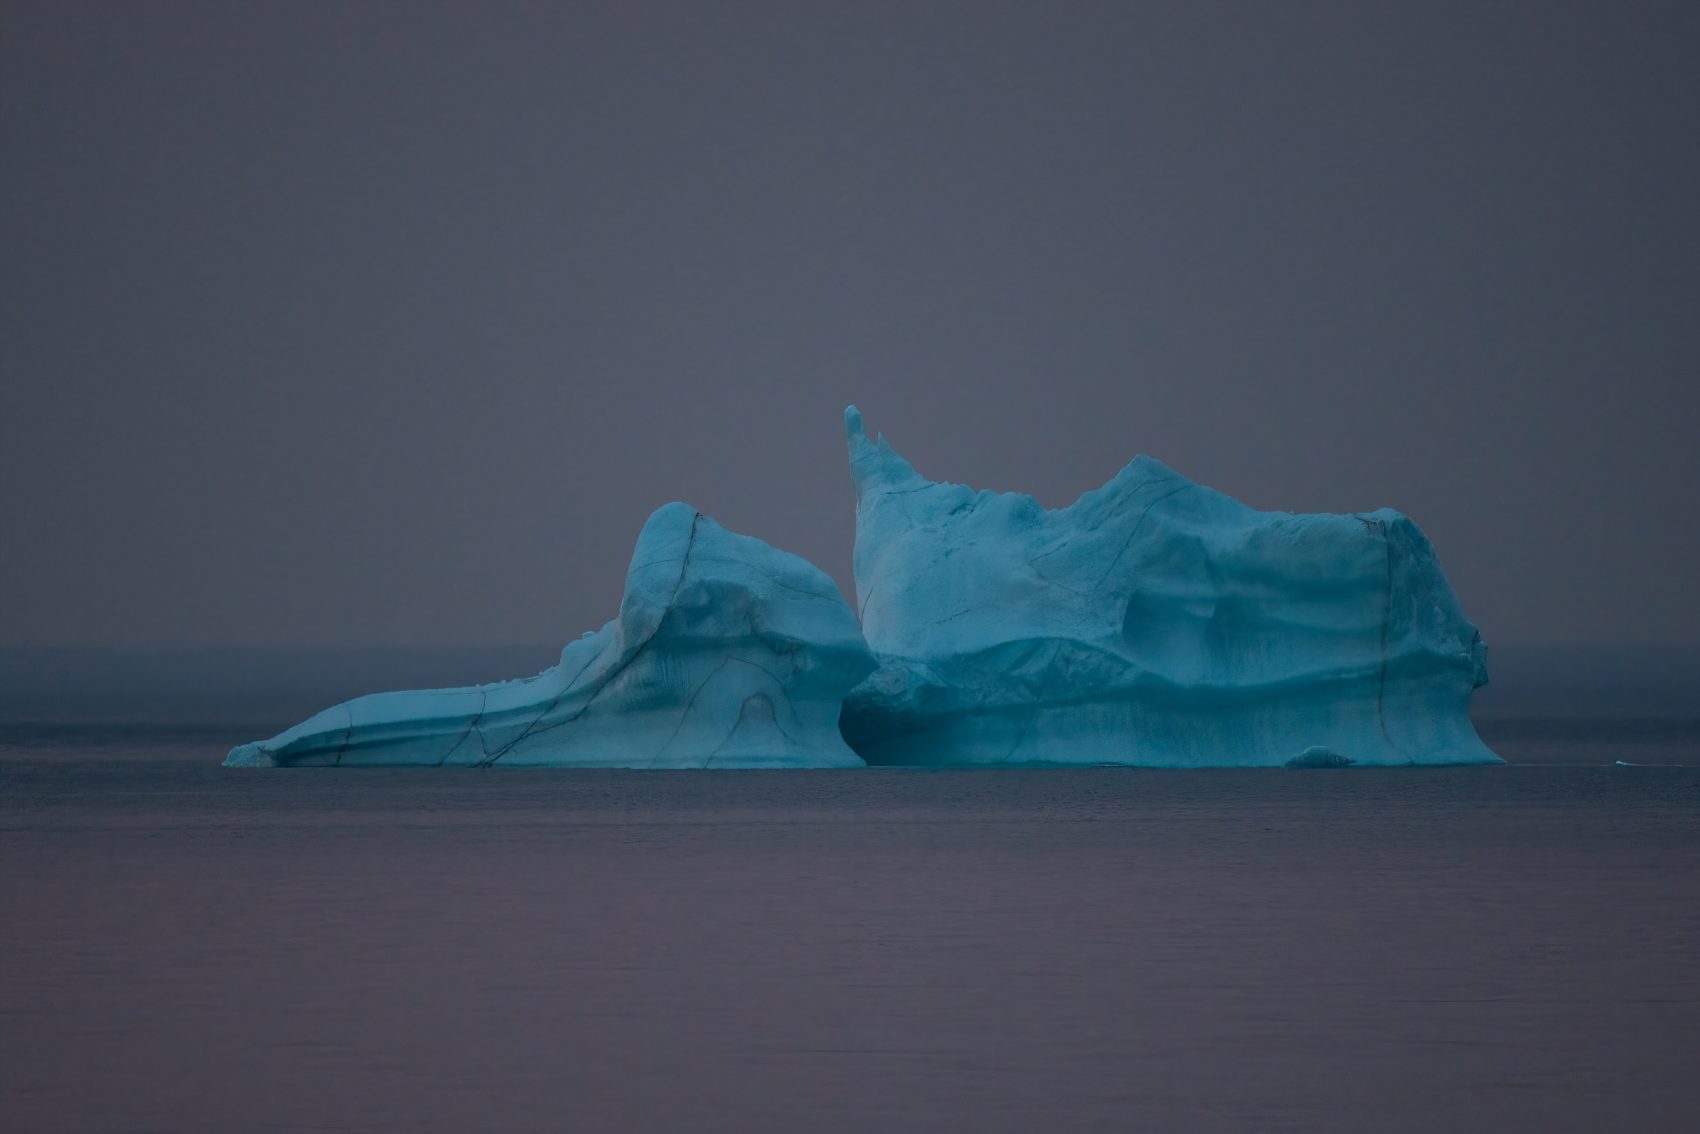 A photo of an iceberg floating of the ocean.